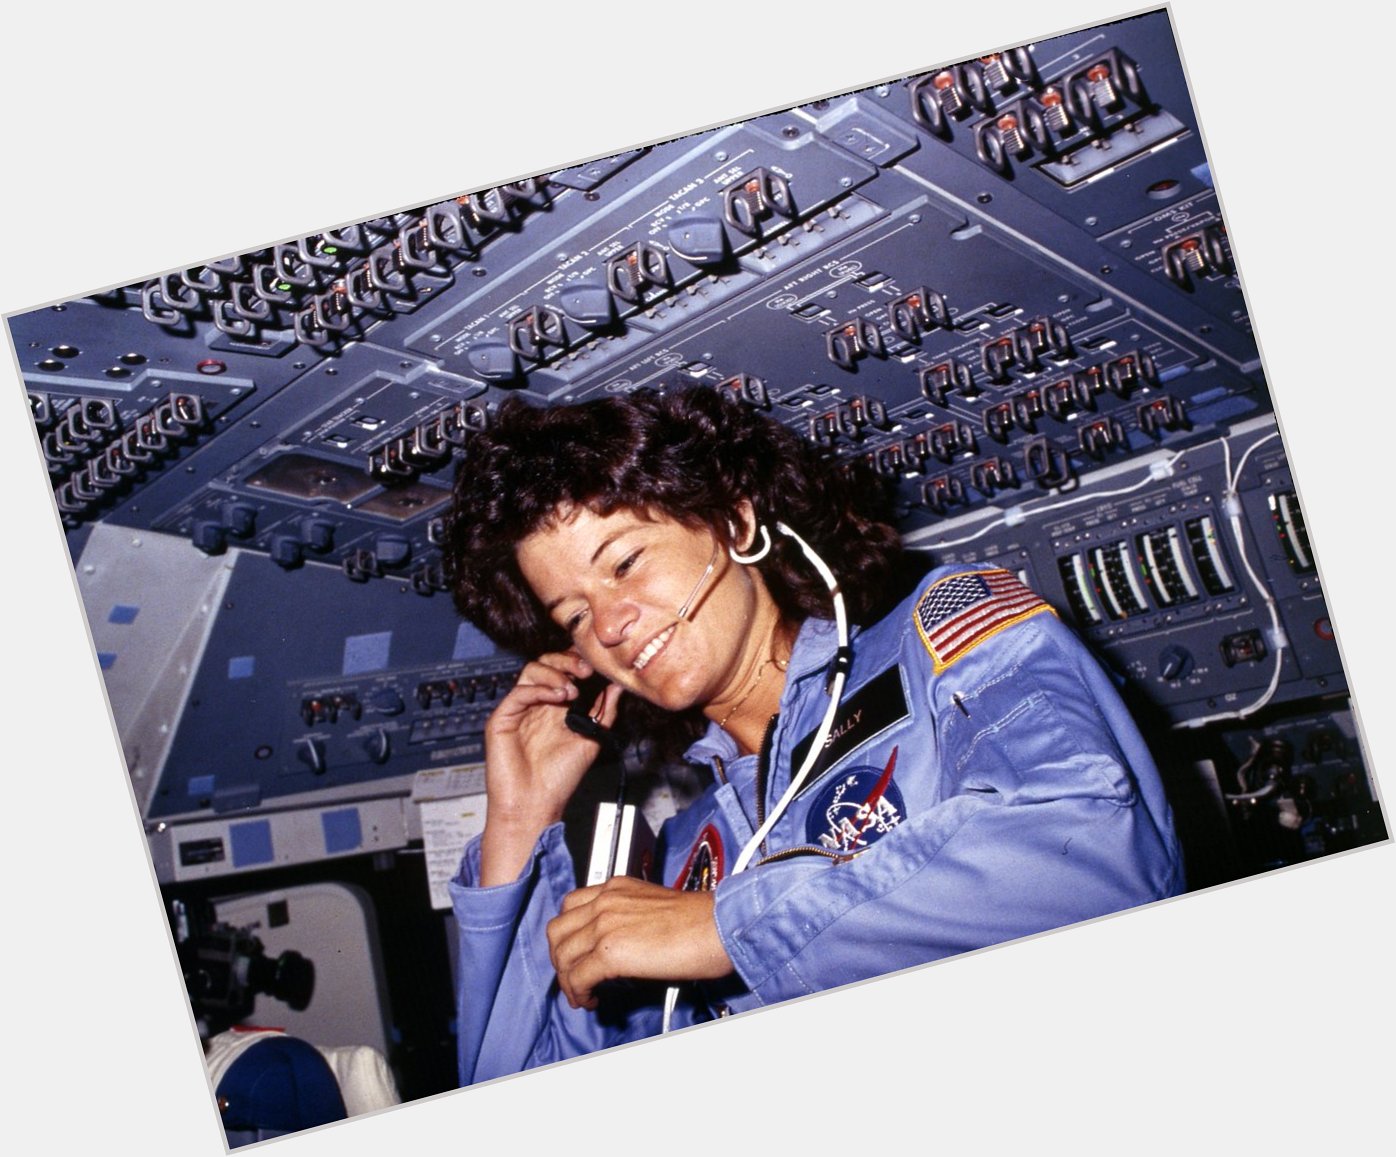 Happy Birthday to Sally Ride, who would have turned 66 today! 